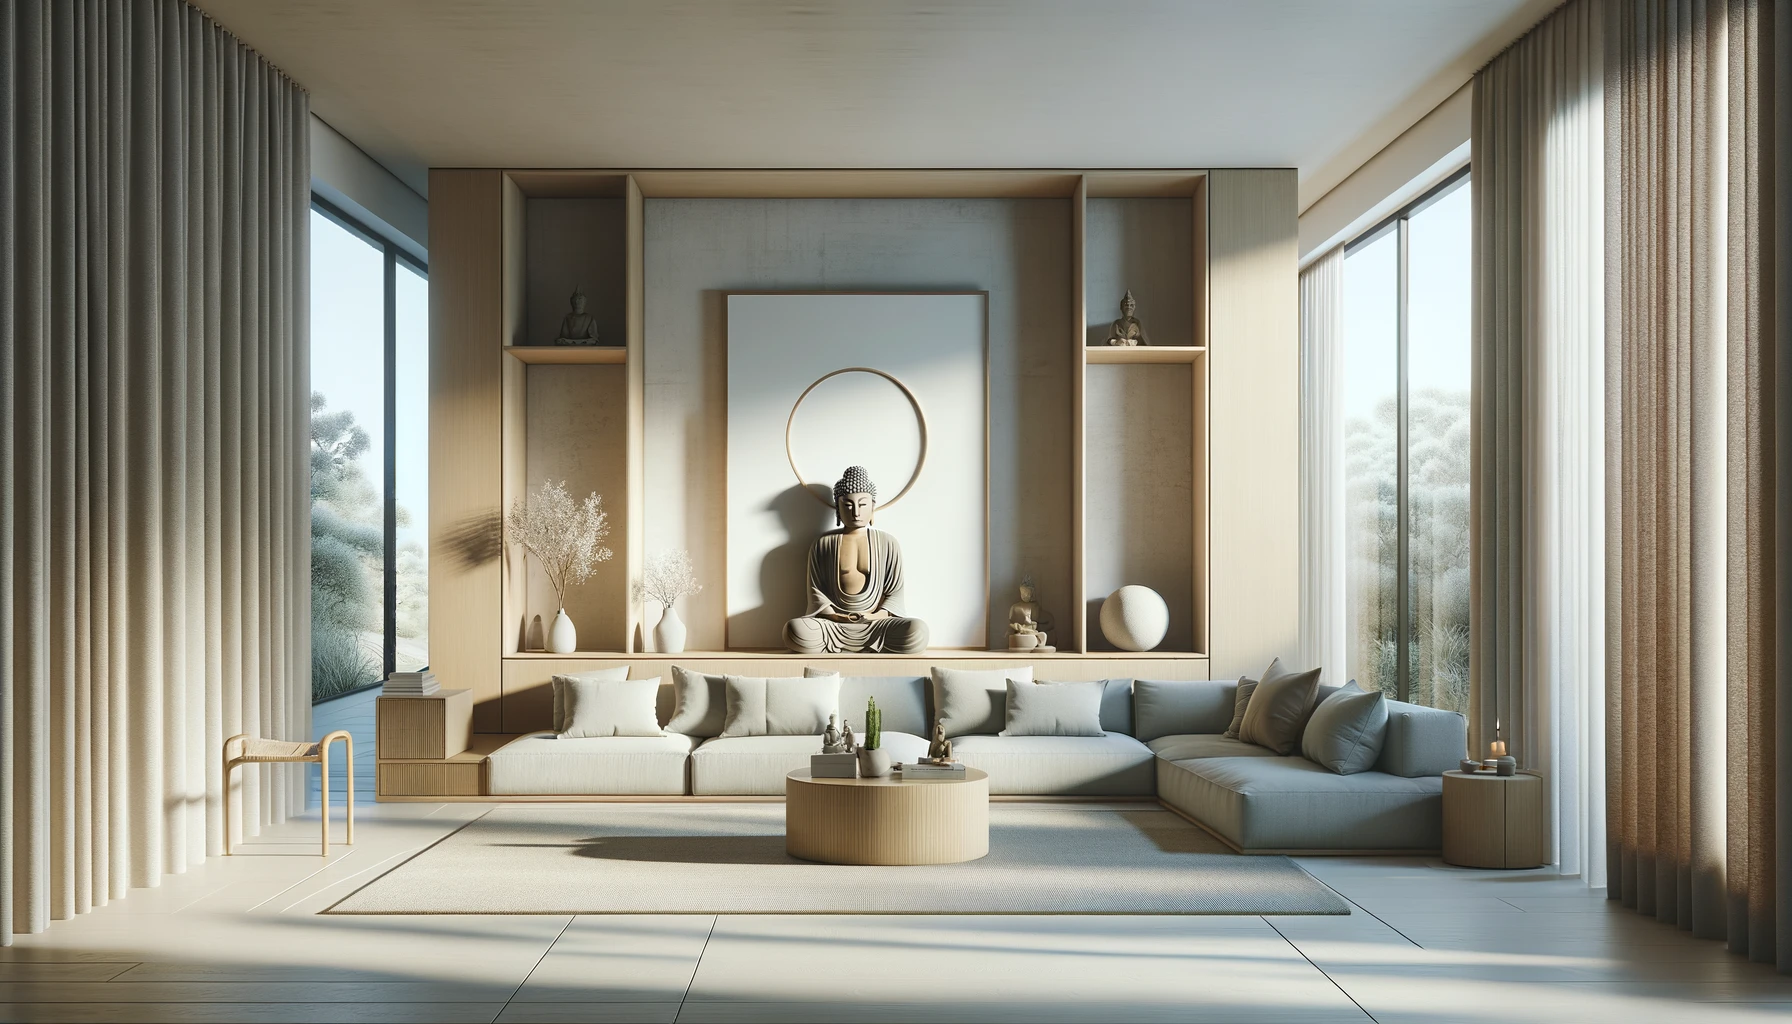 A minimalist and functional Buddha Themed Living Room, with a clean inviting look.